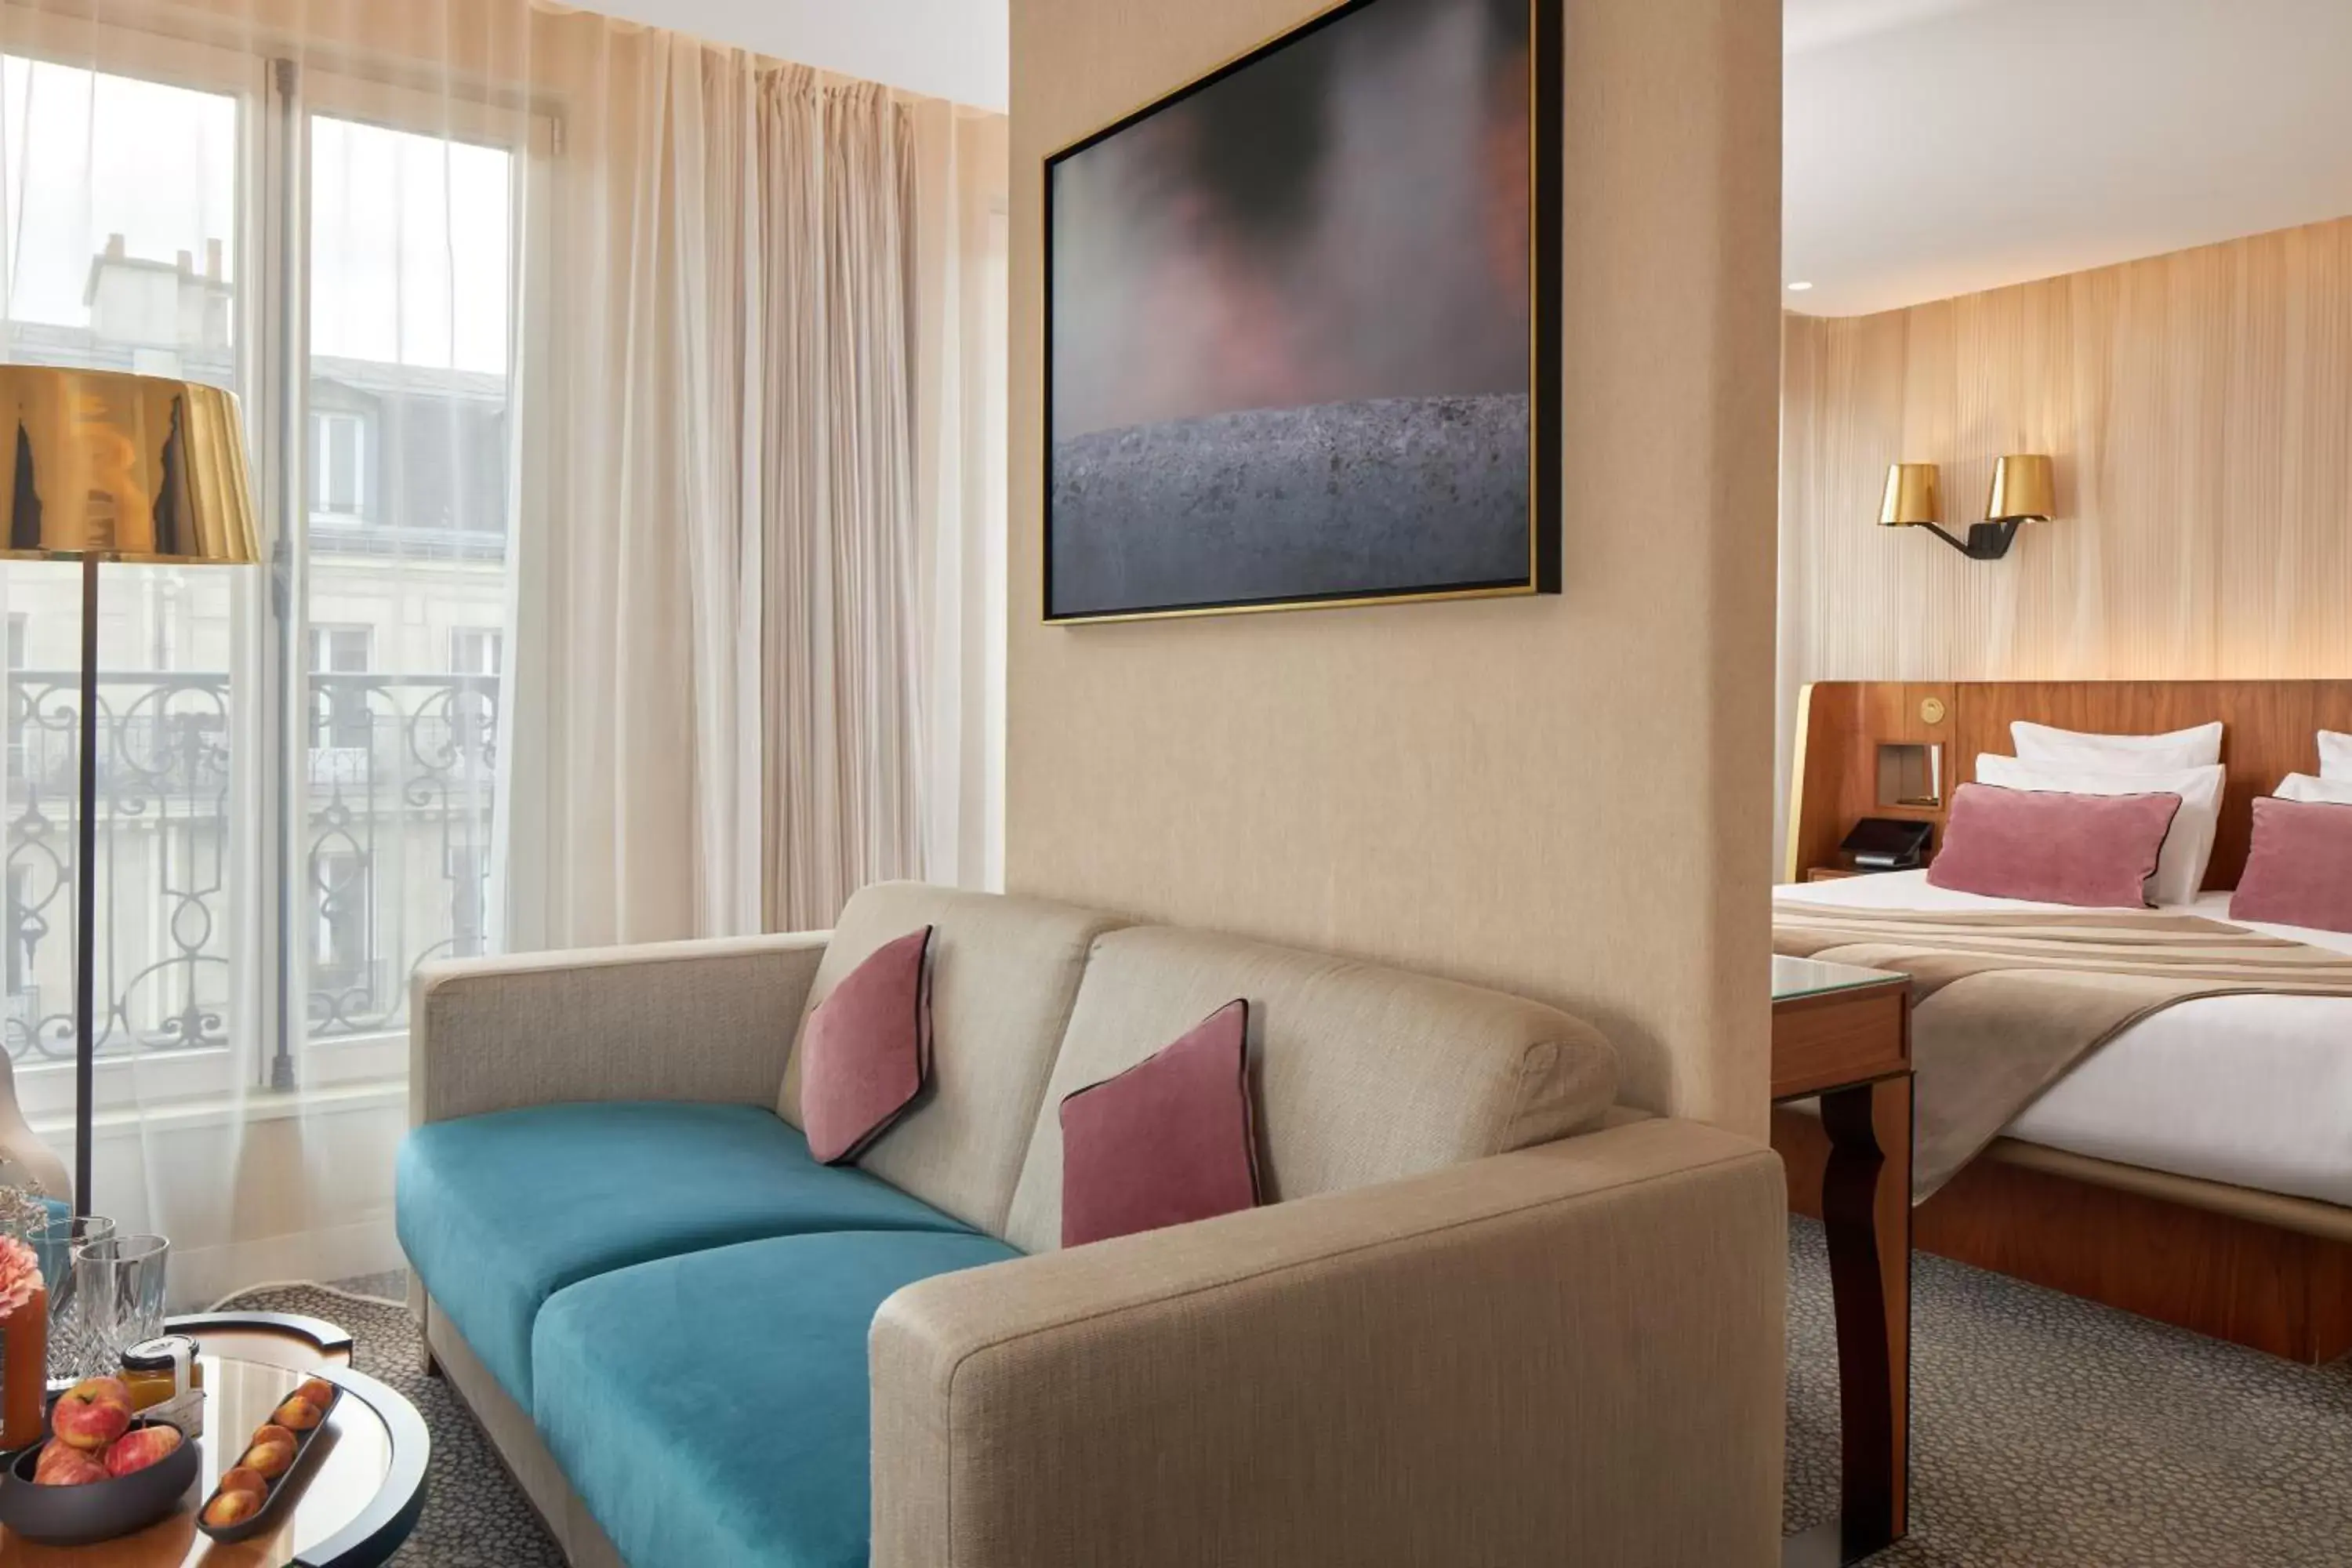 Executive Double Room in Maison Albar Hotels Le Pont-Neuf